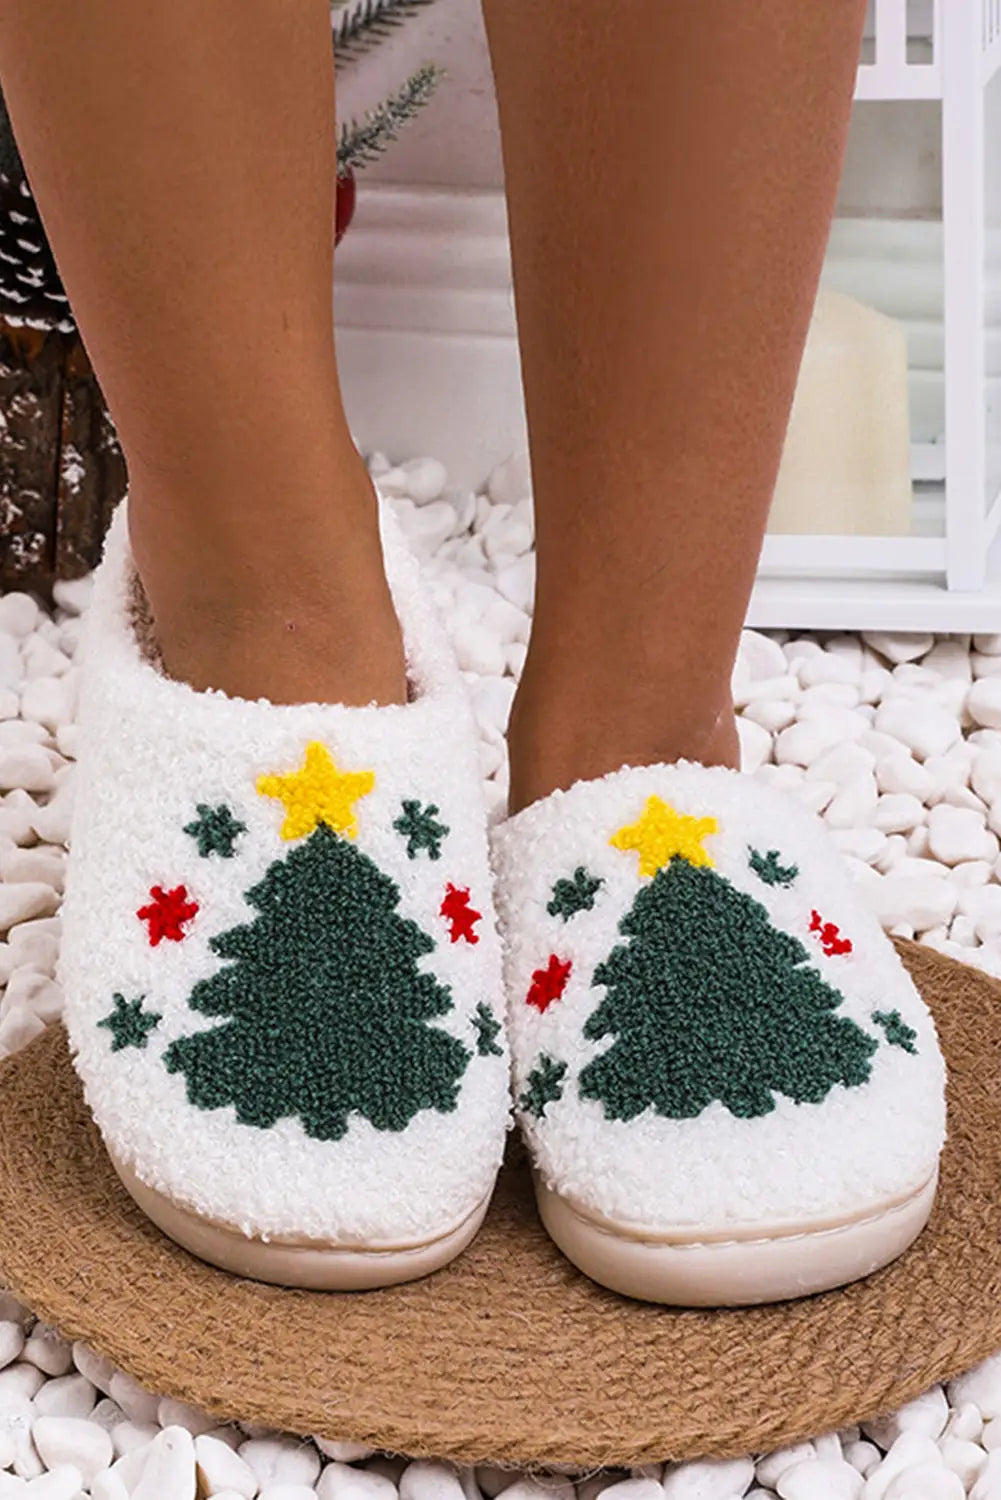 White christmas deer home indoor plush slippers - white1 / 37 / 65% cotton + 35% polyester - shoes & bags